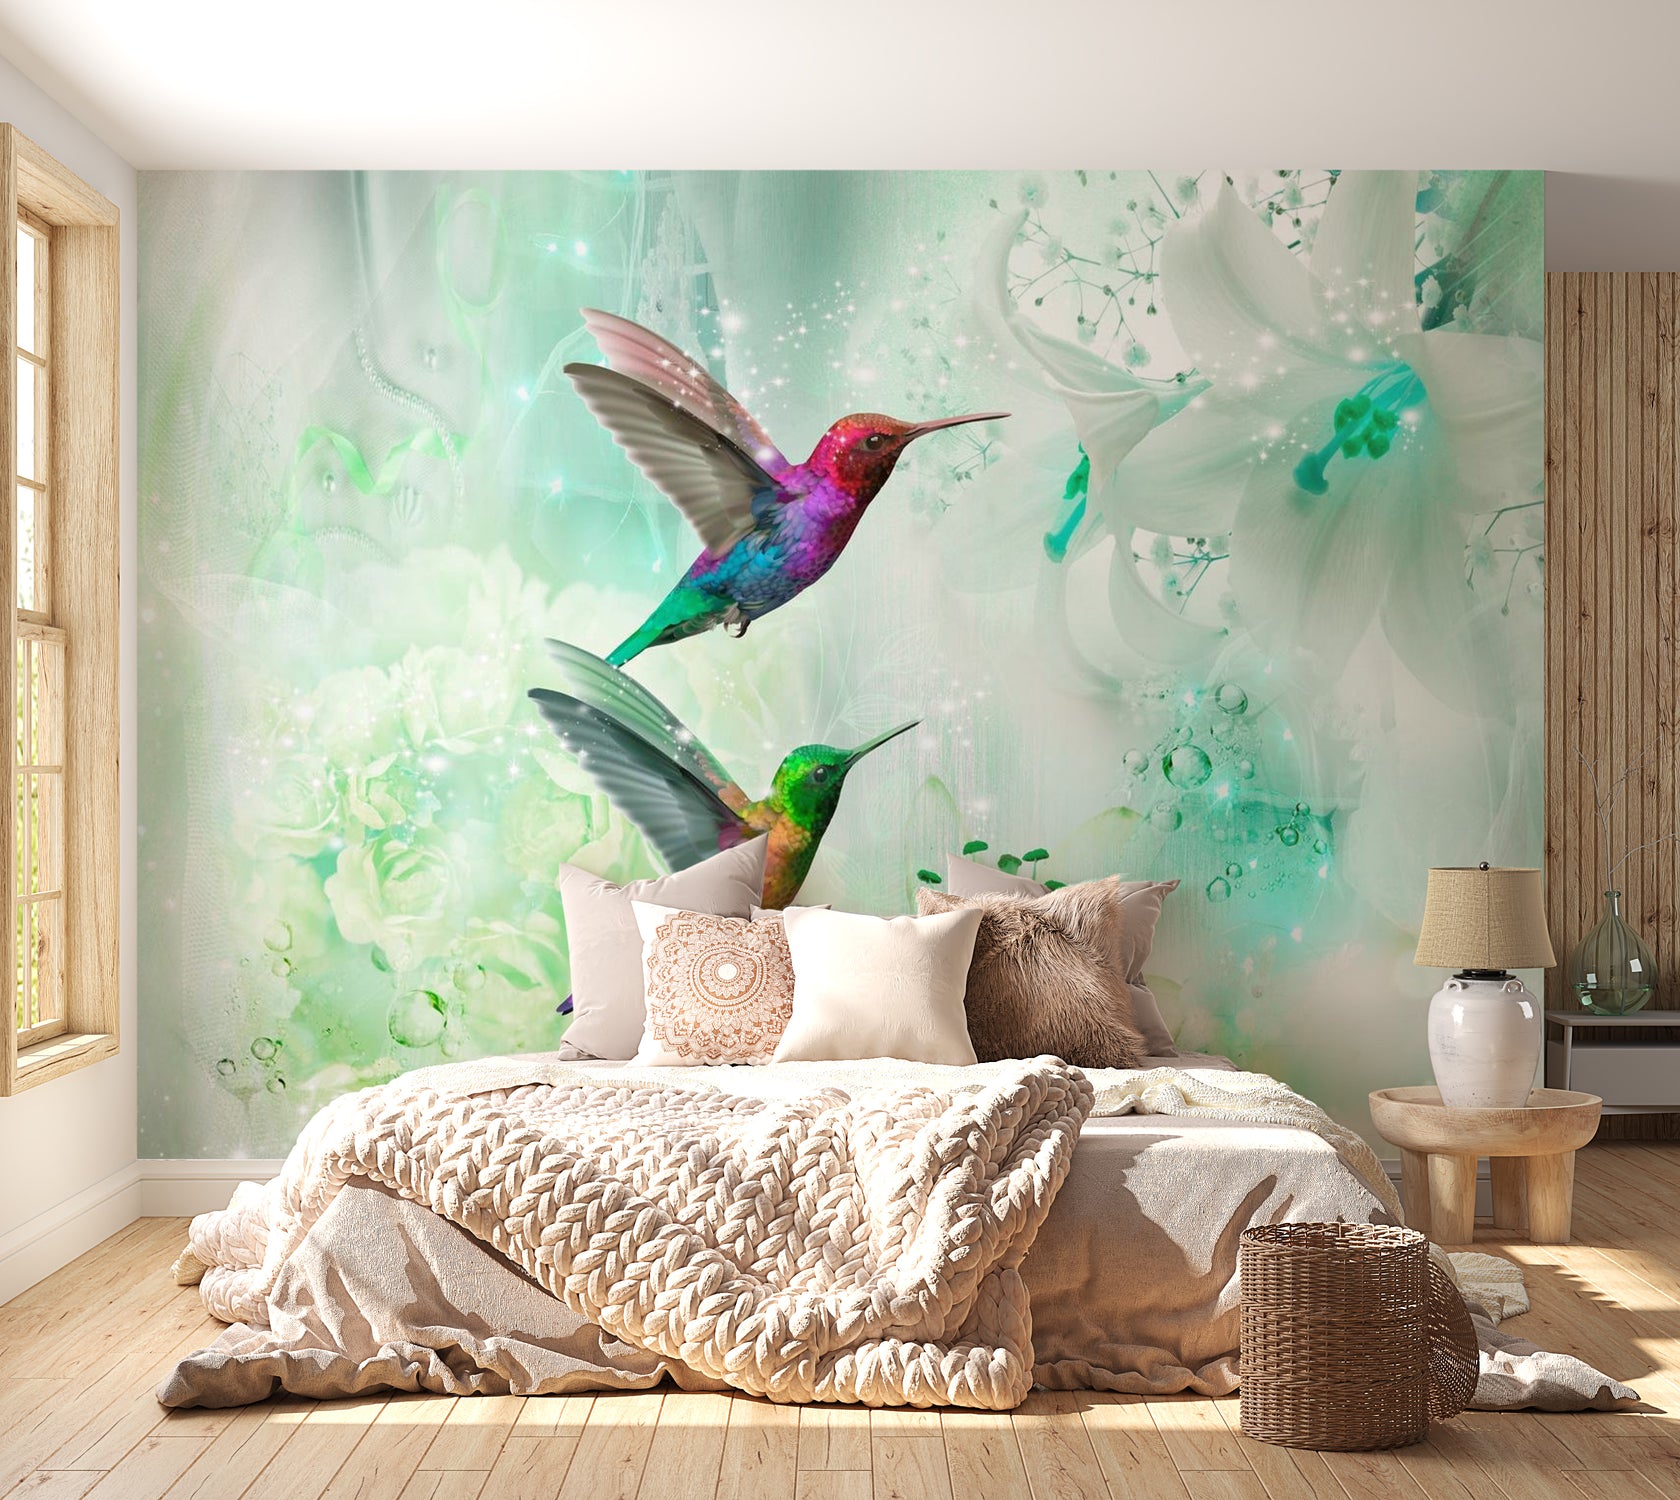 Peel & Stick Animal Wall Mural - Colourful Hummingbirds Green - Removable Wall Decals